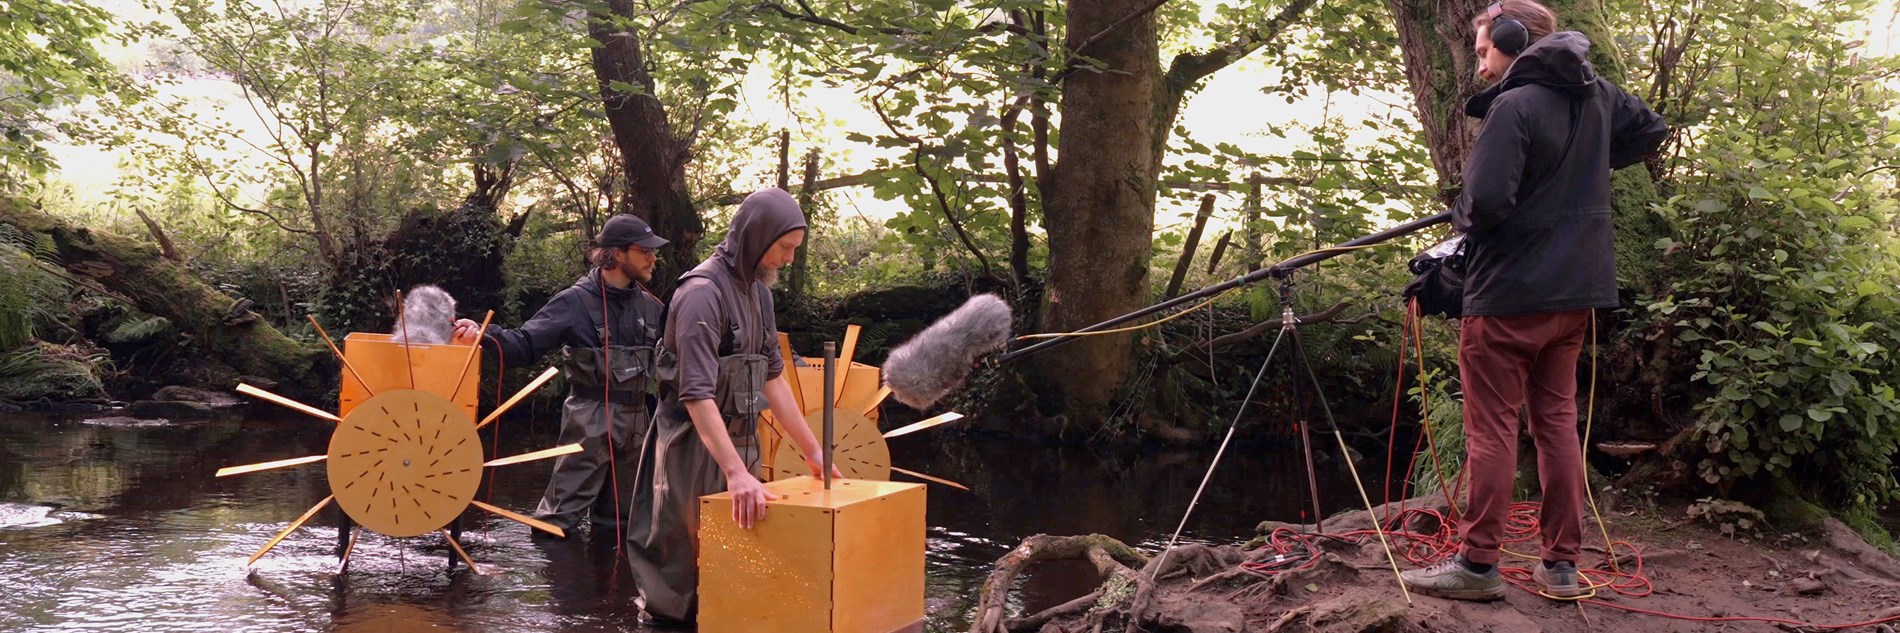 Two musicians playing water-powered mechanical musical instruments on the banks of the River Rivelin. They're wearing waders while someone on the banks of the river records the music using a long-arm microphone over the water.